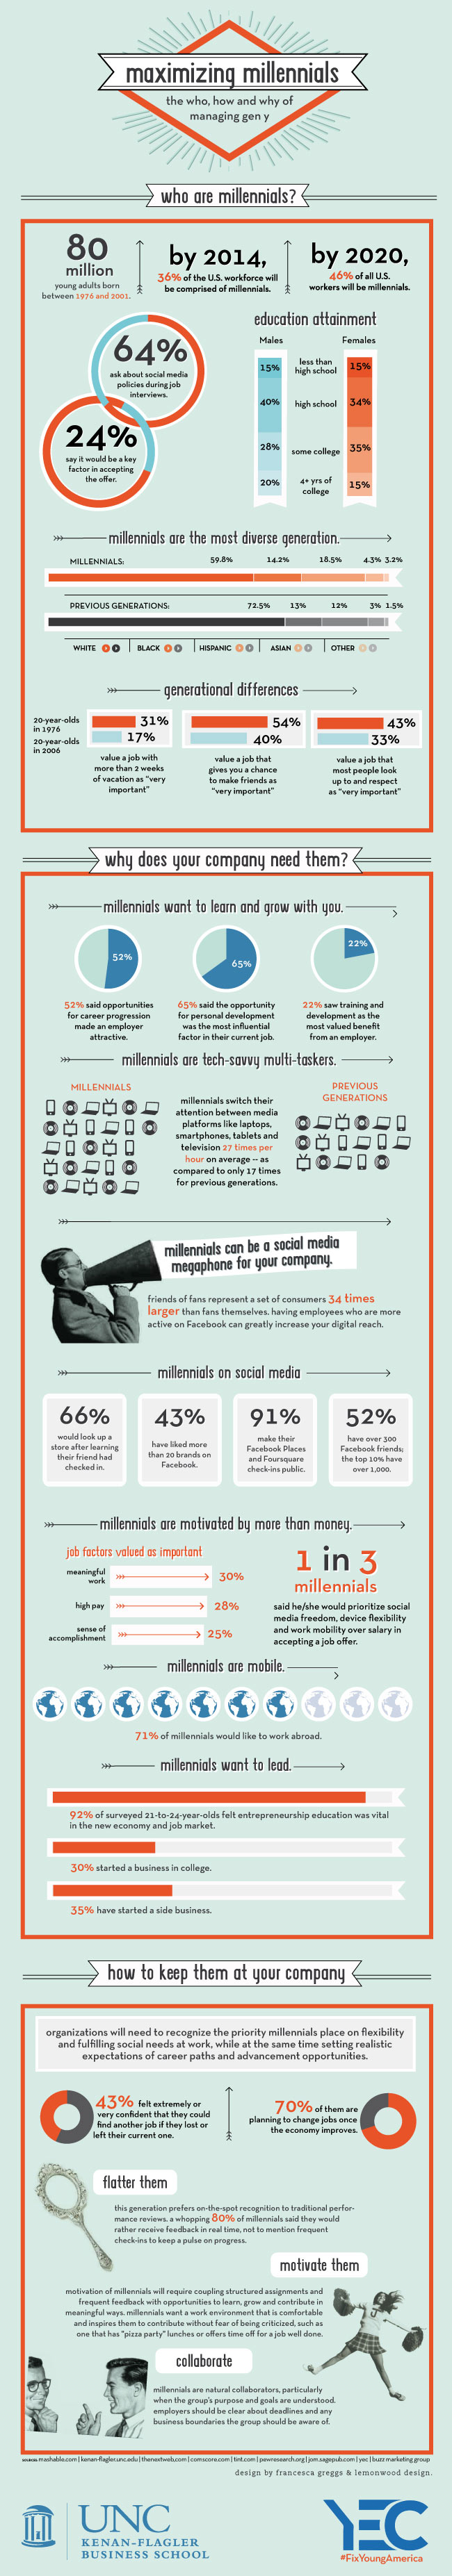 geny-in-the-workplace-infographic-mba-at-unc-1